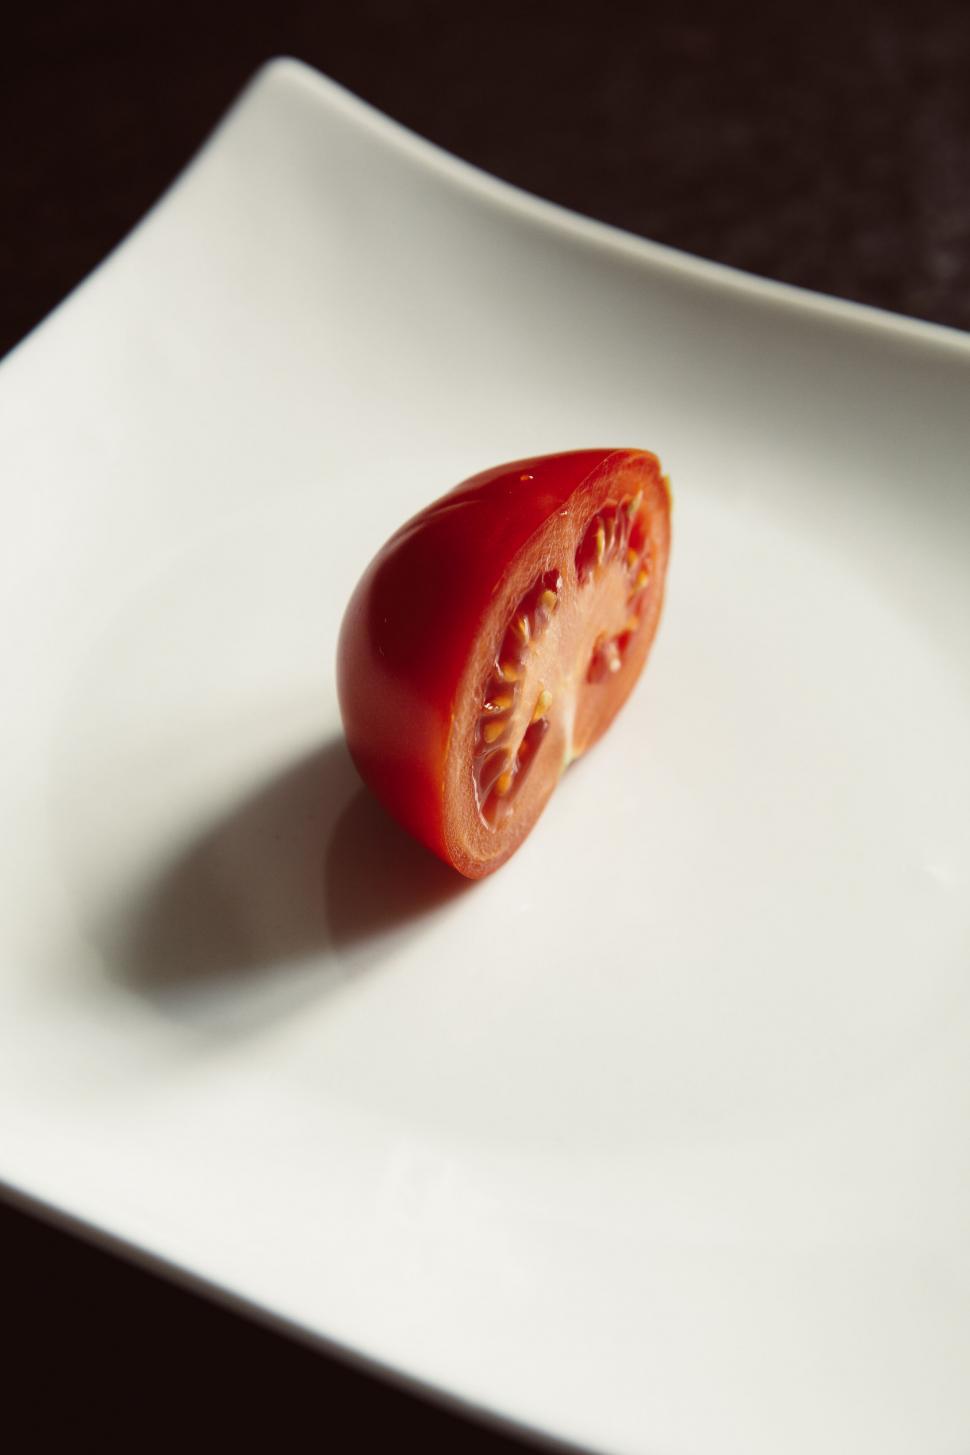 Free Image of Half a tomato on a white plate 